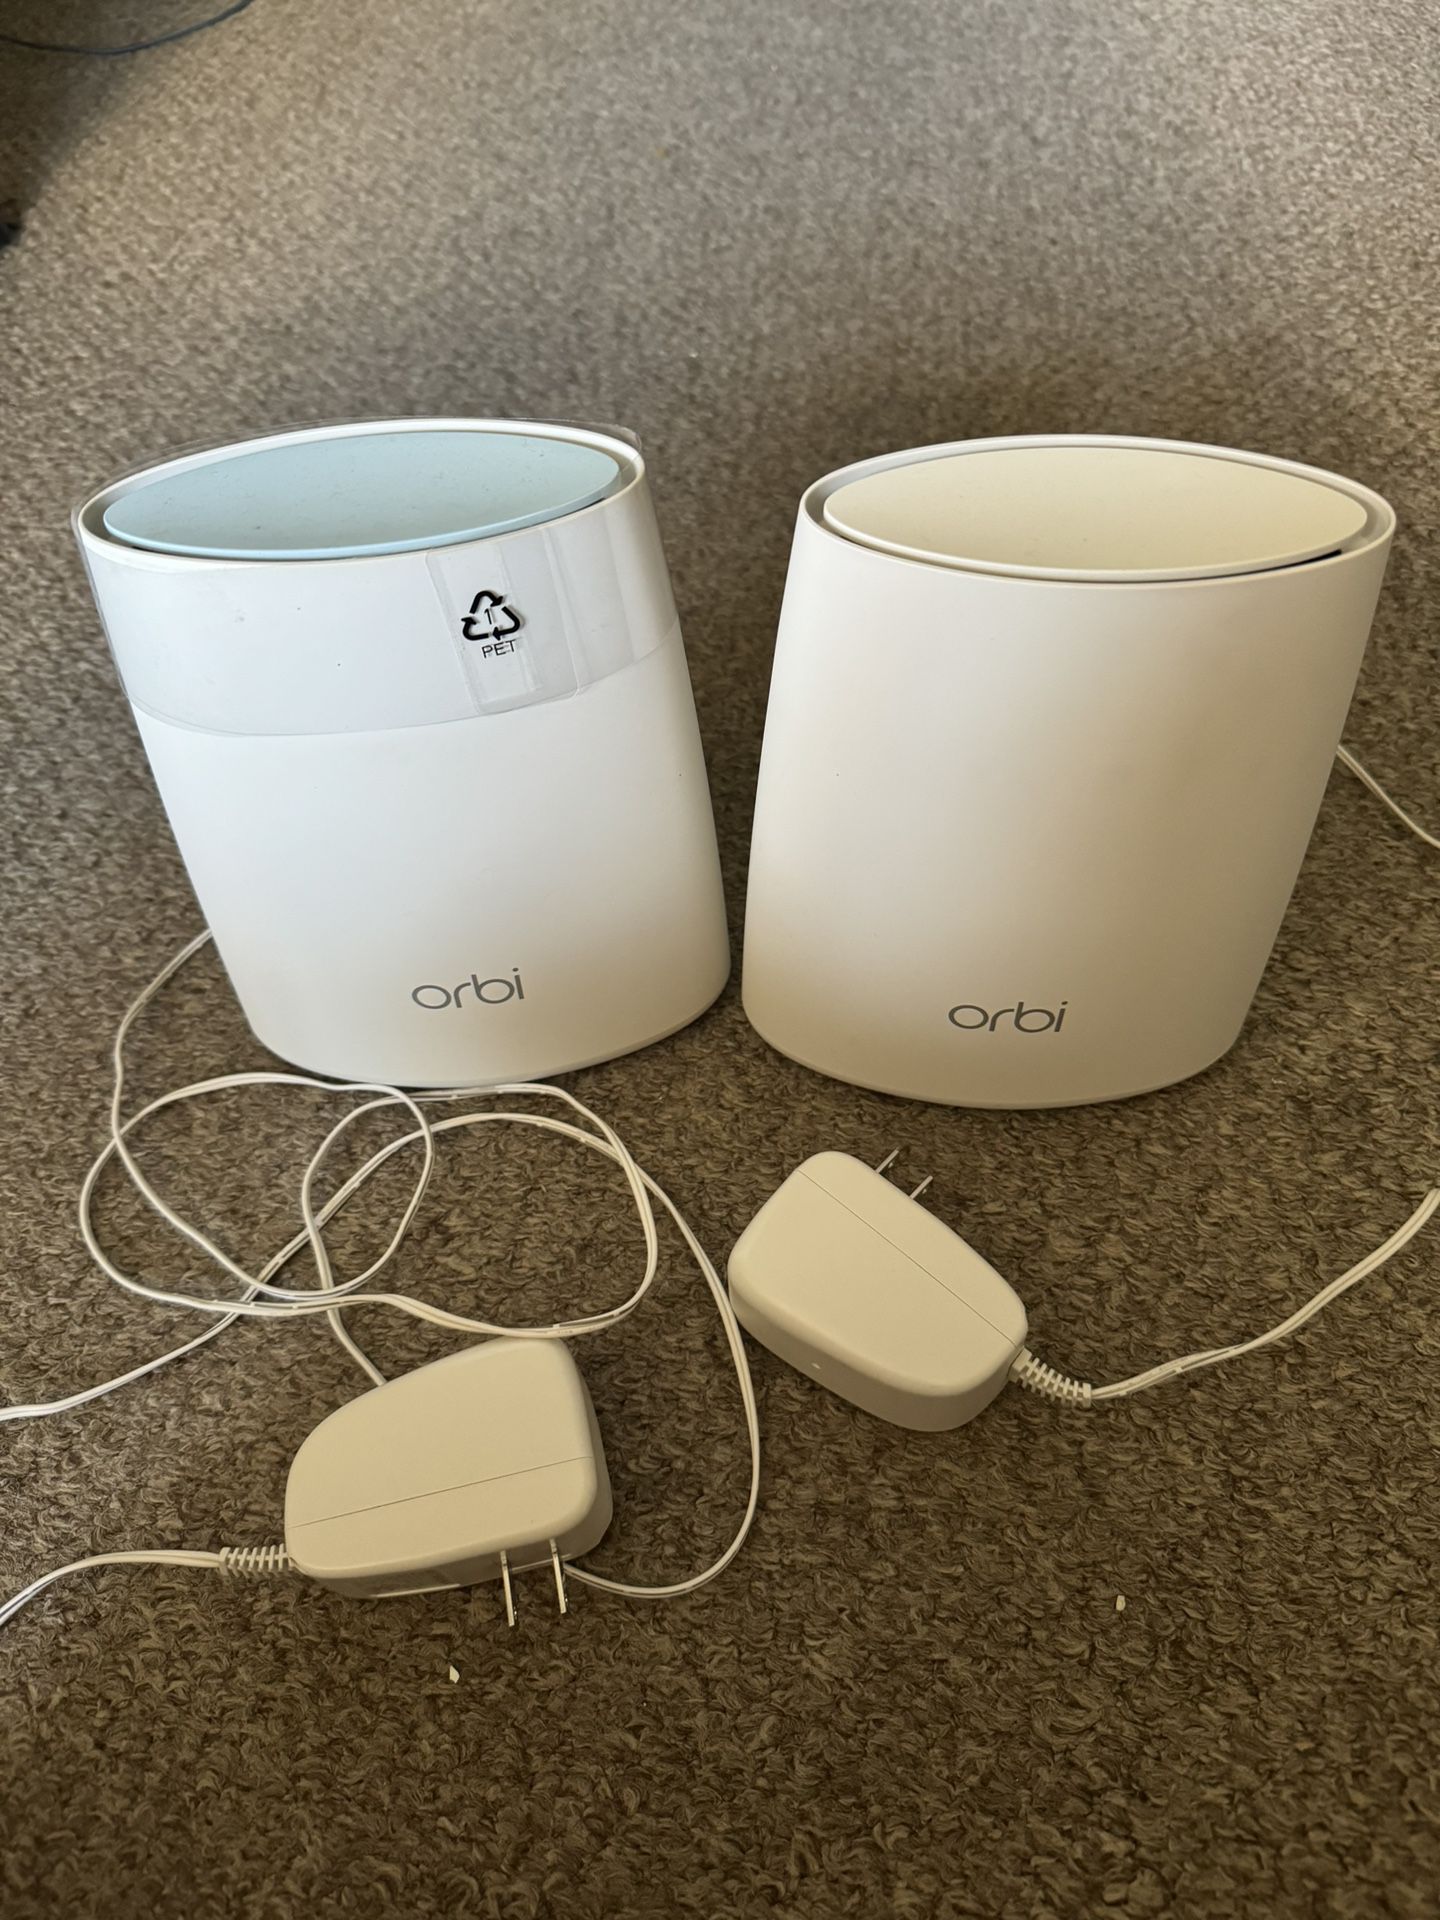 Orbi Router RBR40 and Orbi RBS40